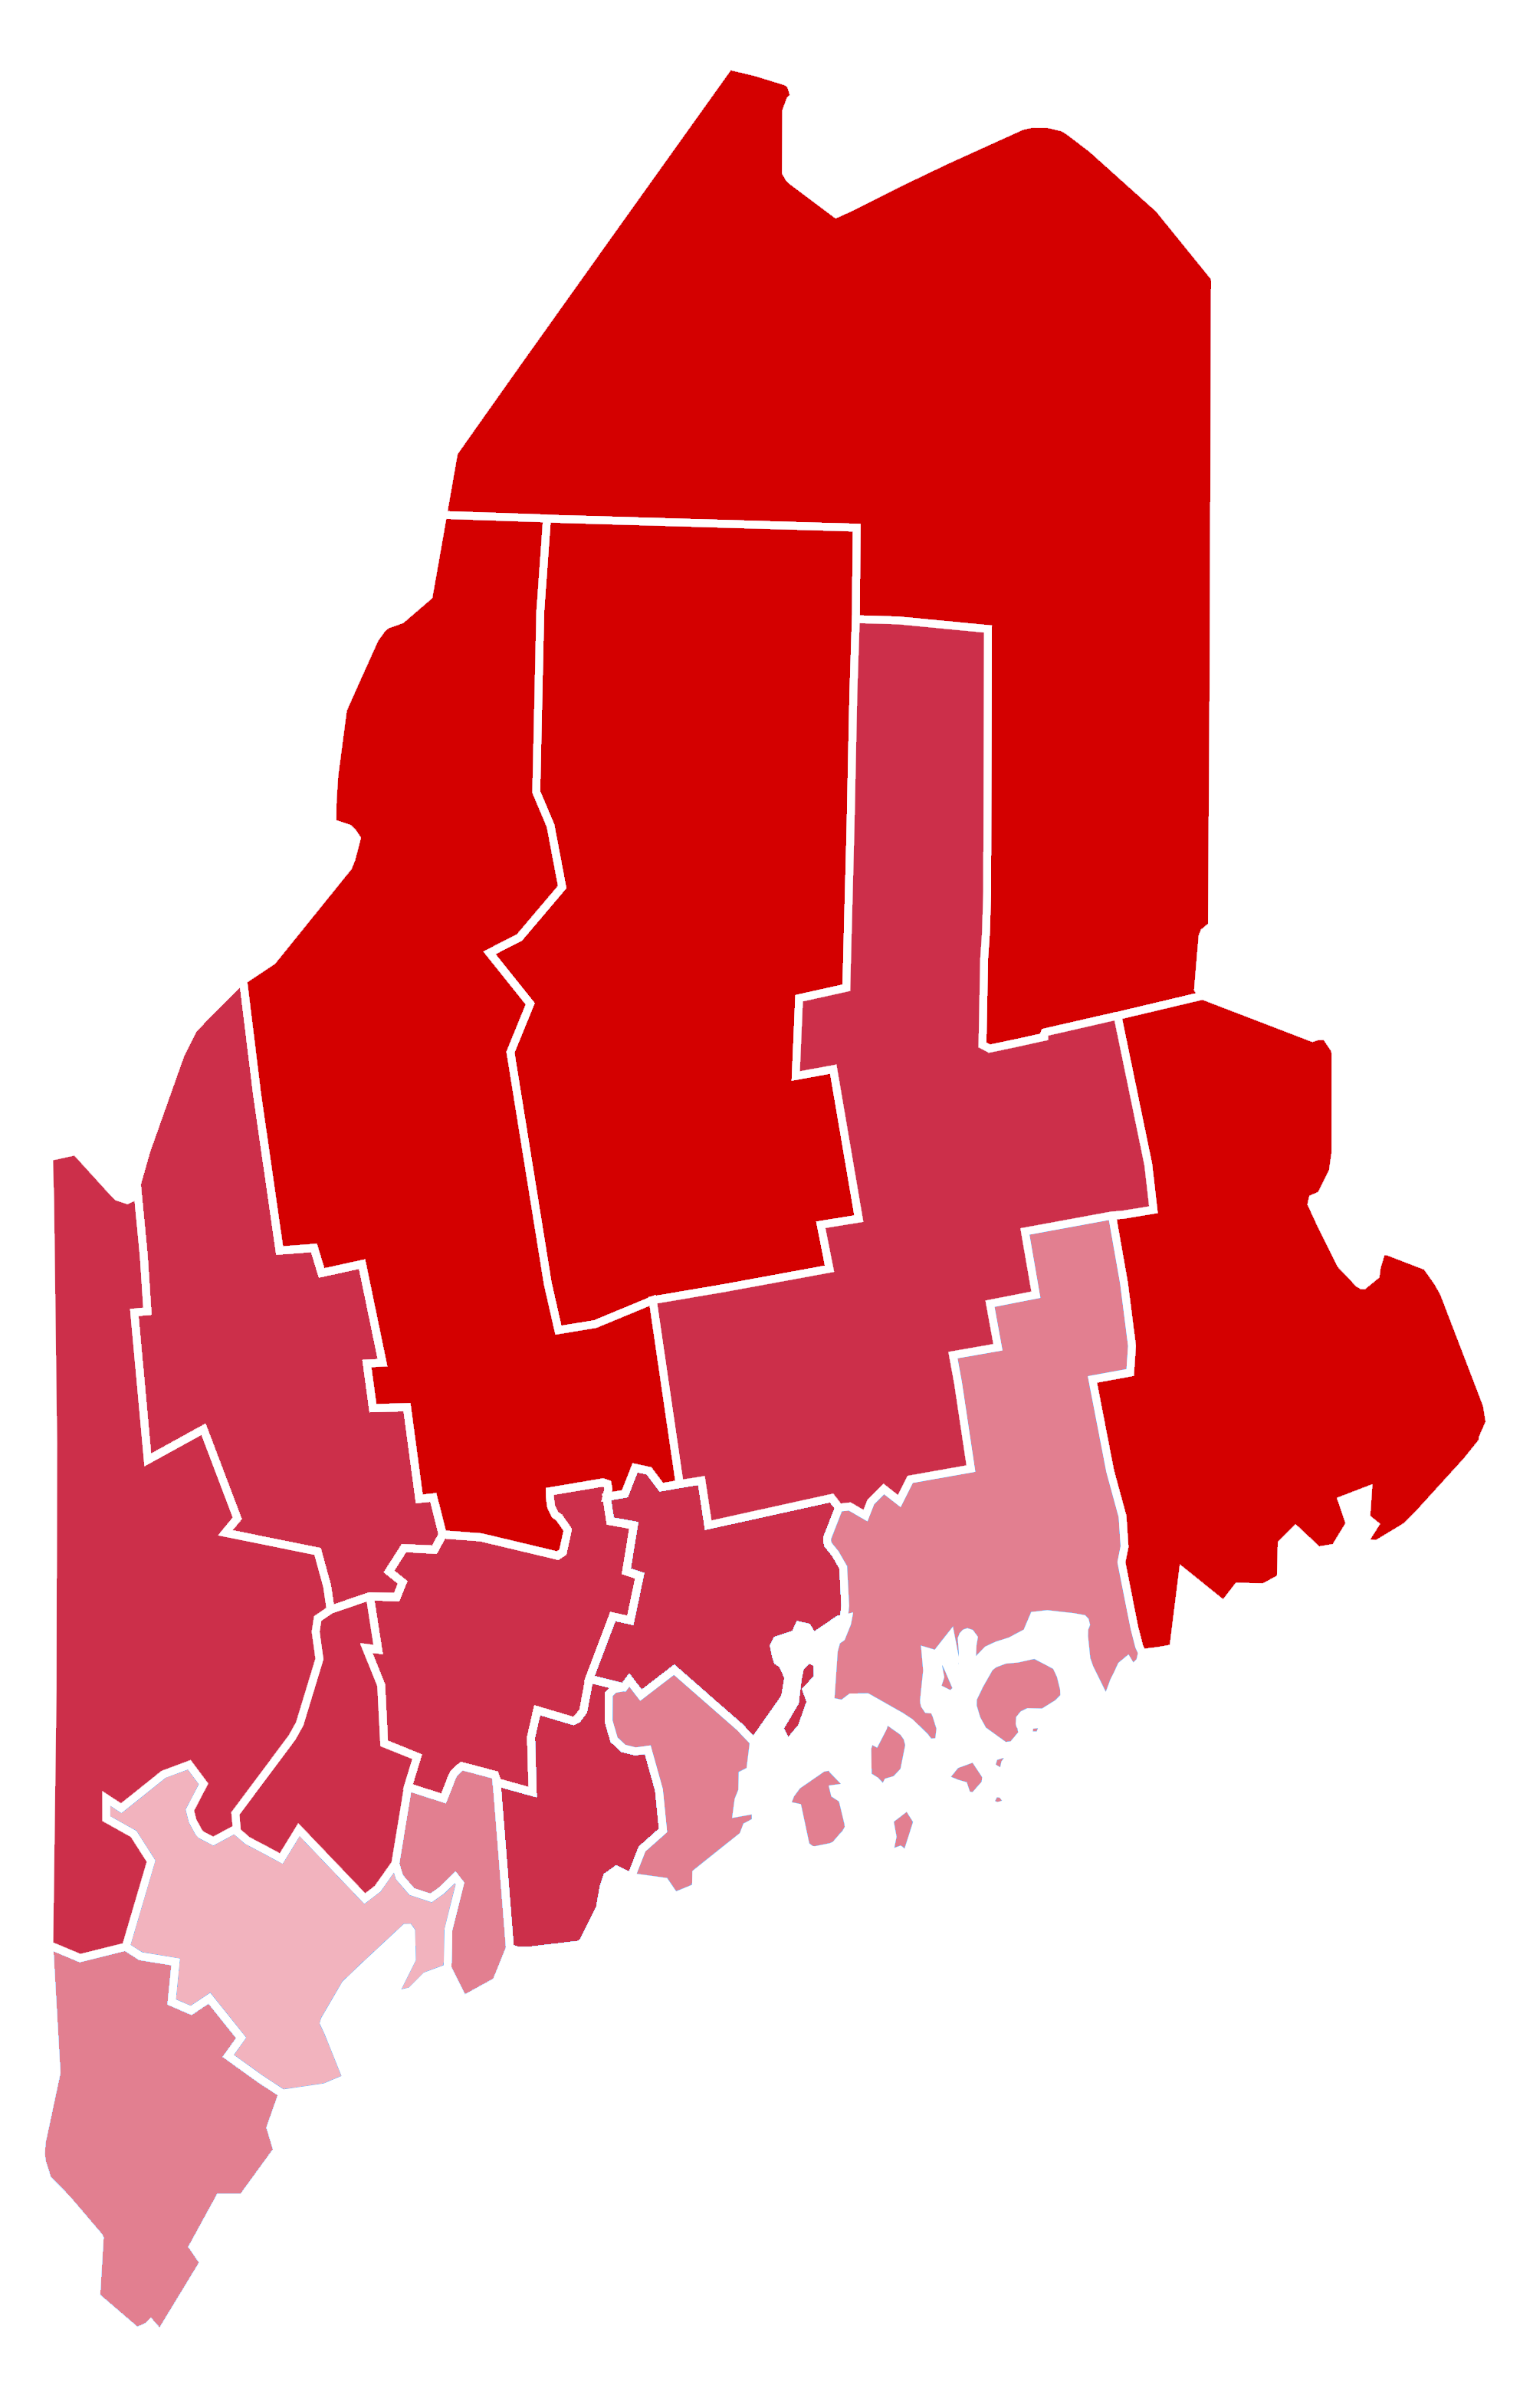 2000px-Maine_Presidential_Election_Results_2016_Republican_Landslide_15.06%.png